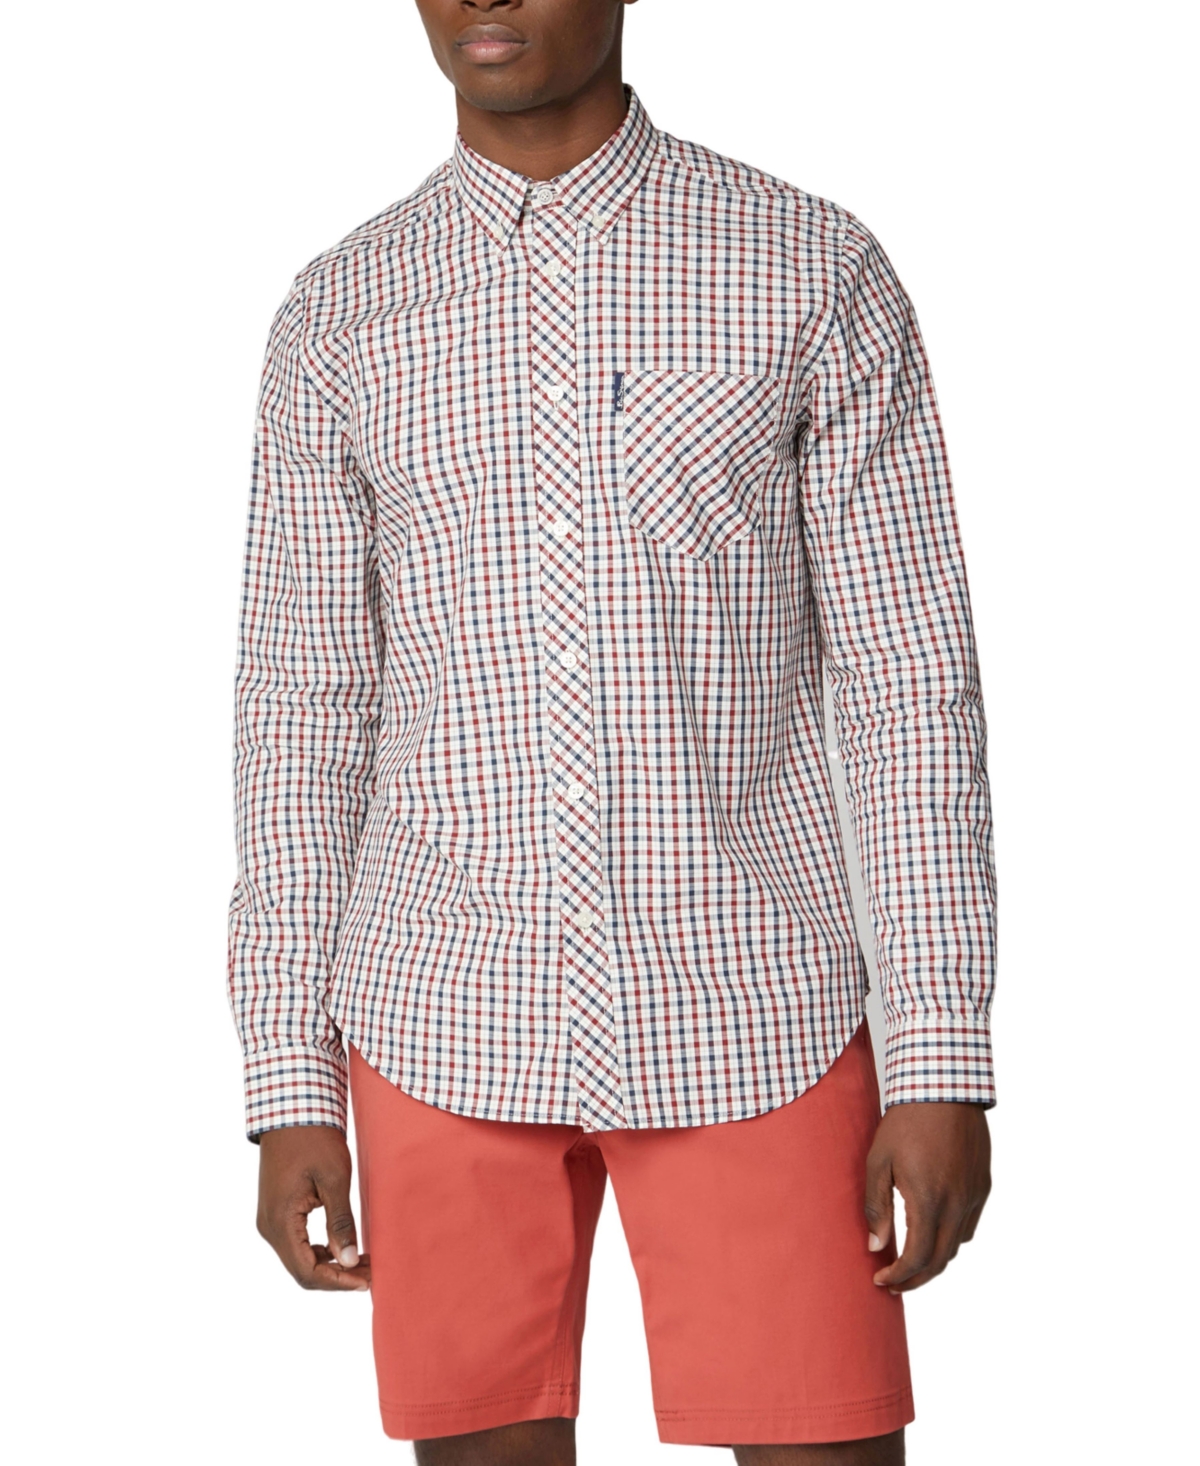 Men's Signature House Check Long-Sleeve Shirt - Red